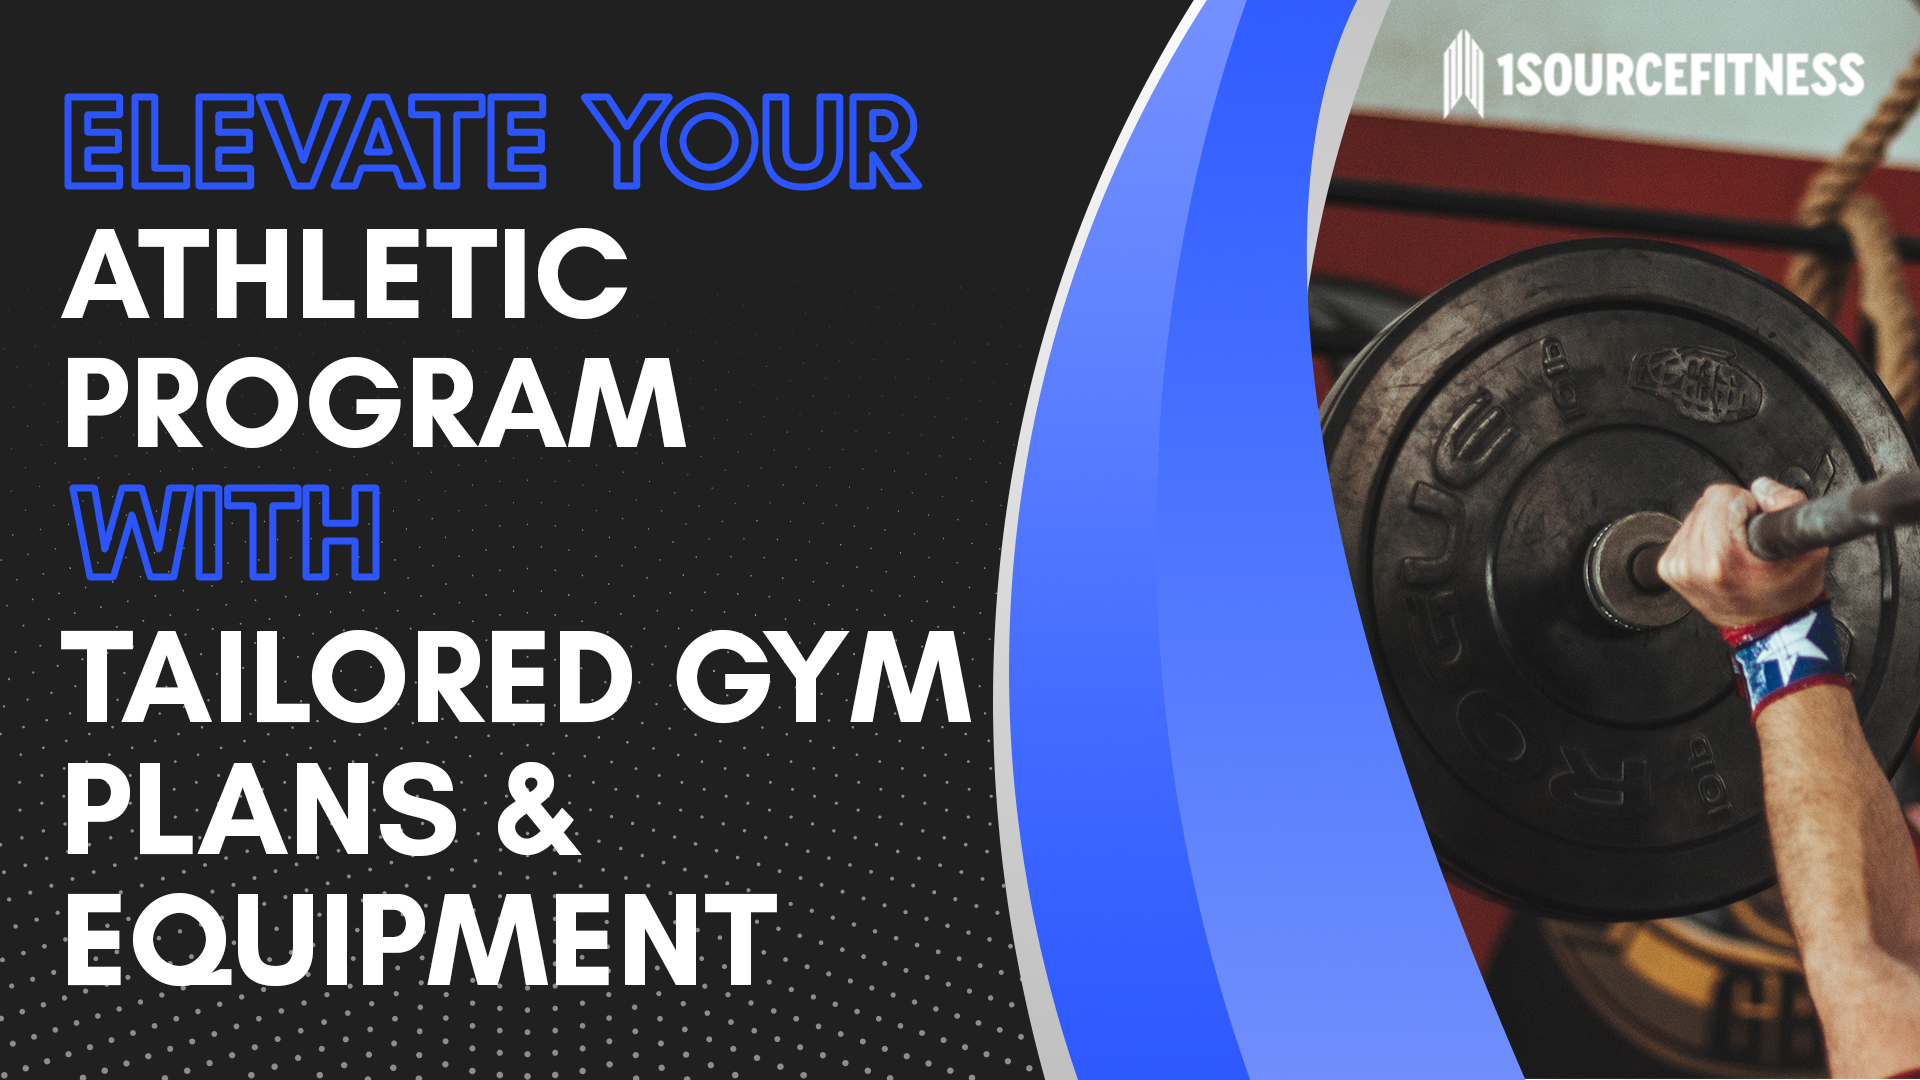 Elevate Your Athletic Program with Tailored Gym Plans & Equipment